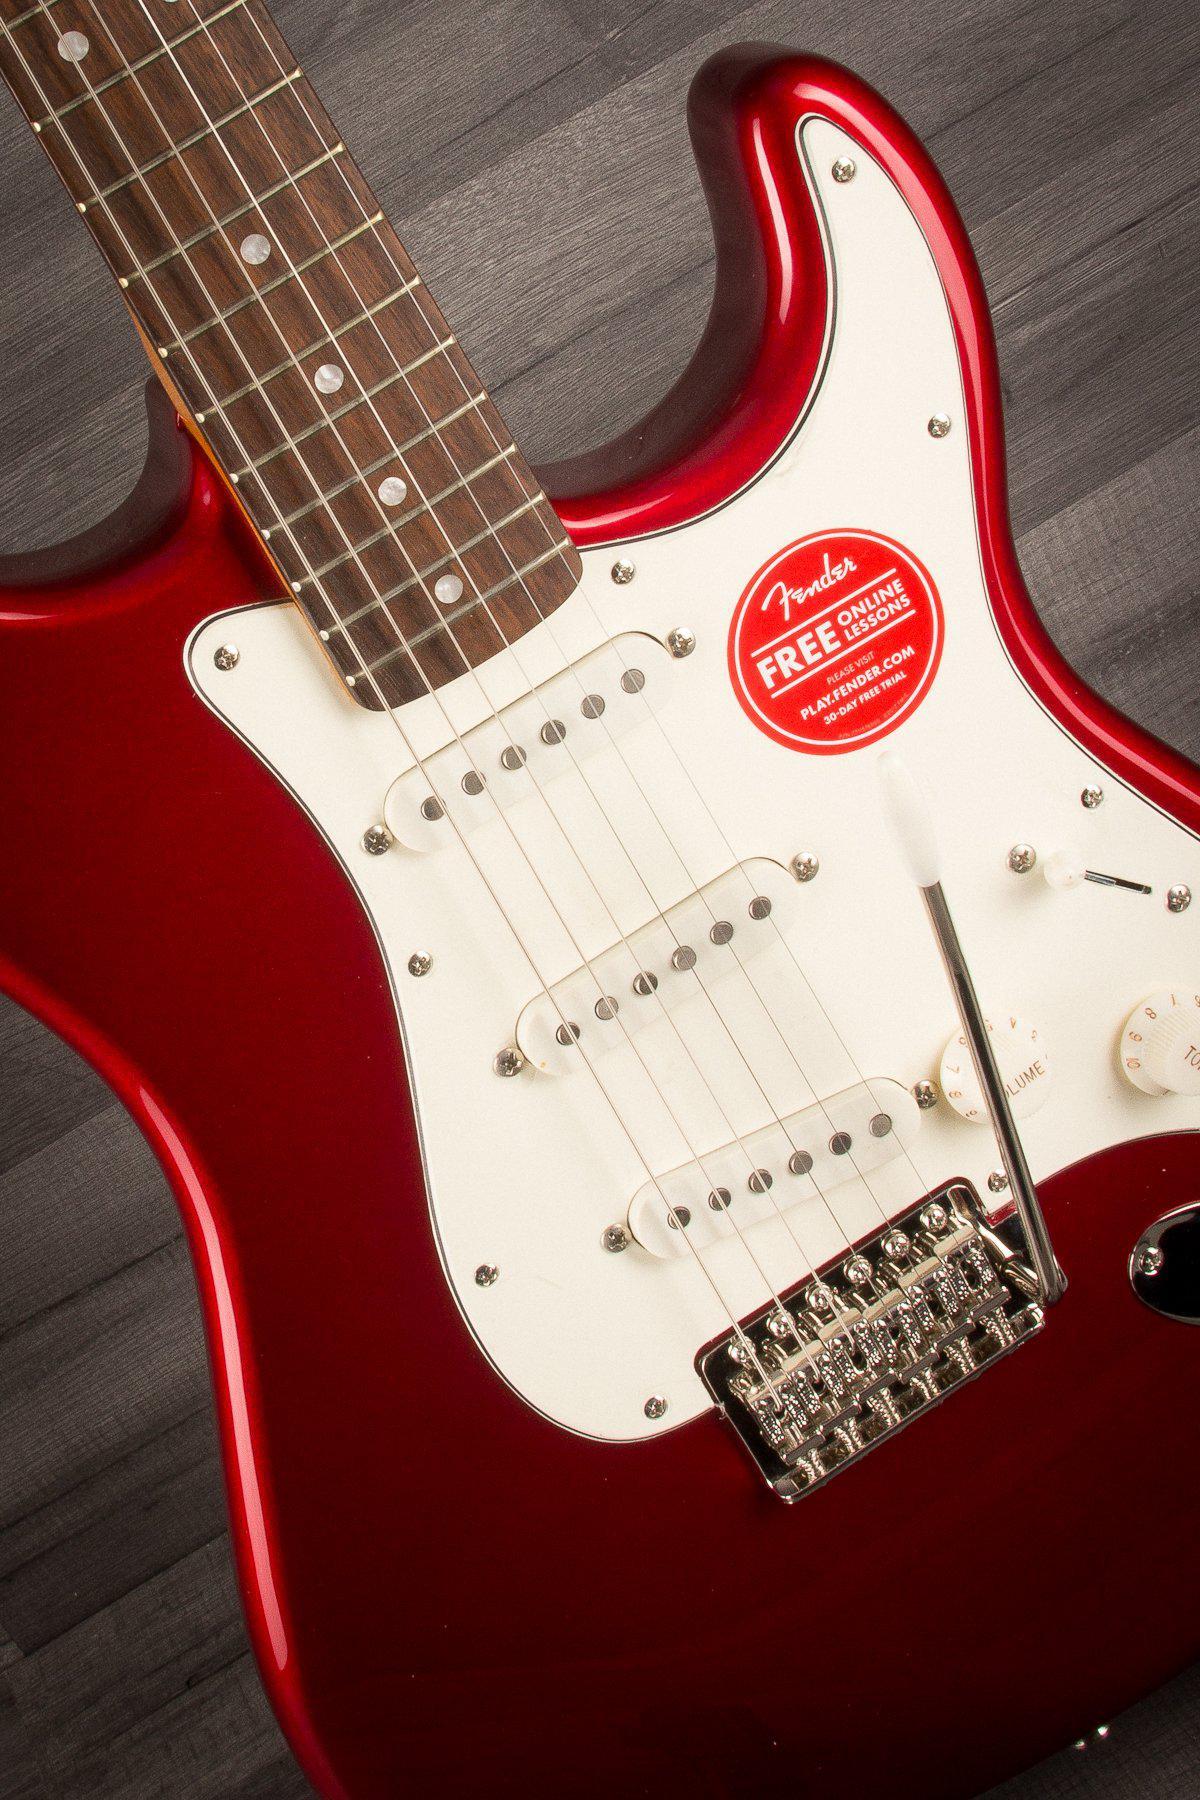 Squier Electric Guitar Squier Classic Vibe '60s Stratocaster Candy Apple Red